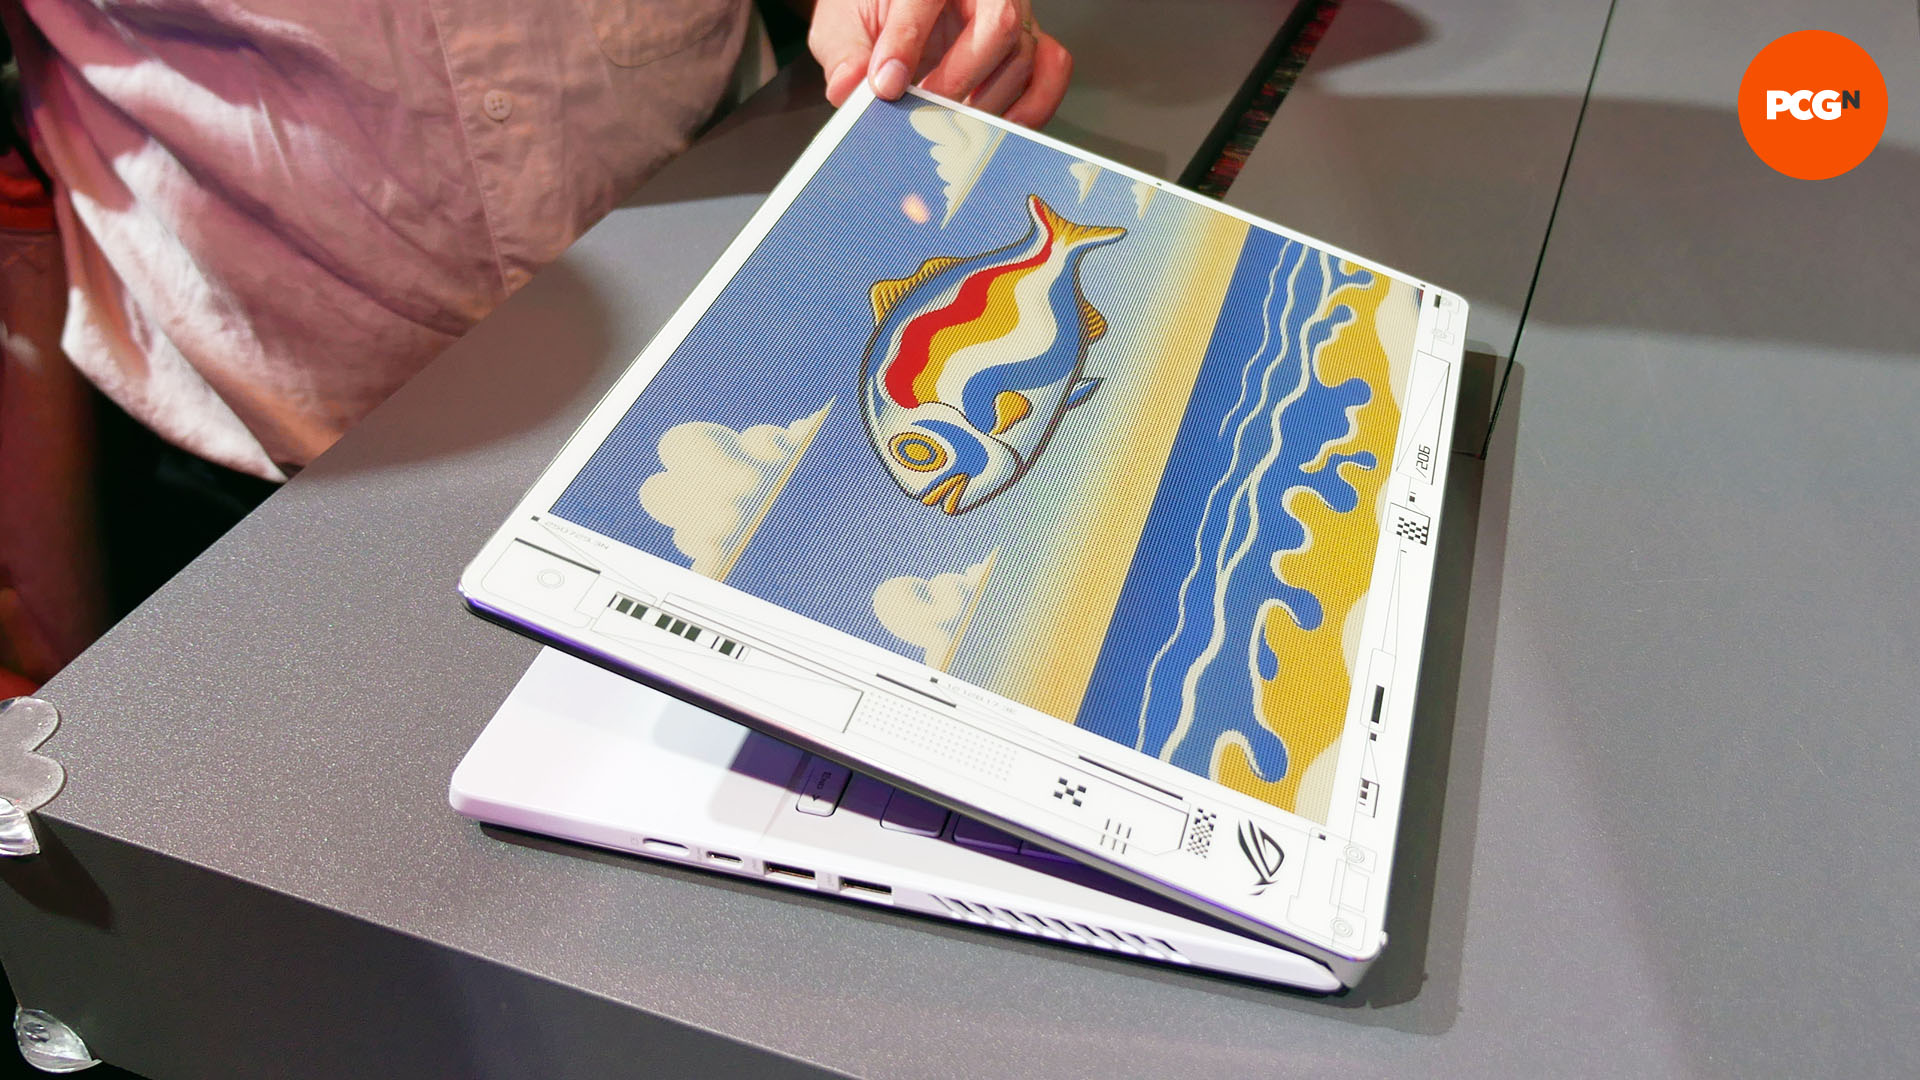 Asus Project Dali: Customizable E-ink laptop lid curated design of flying fish